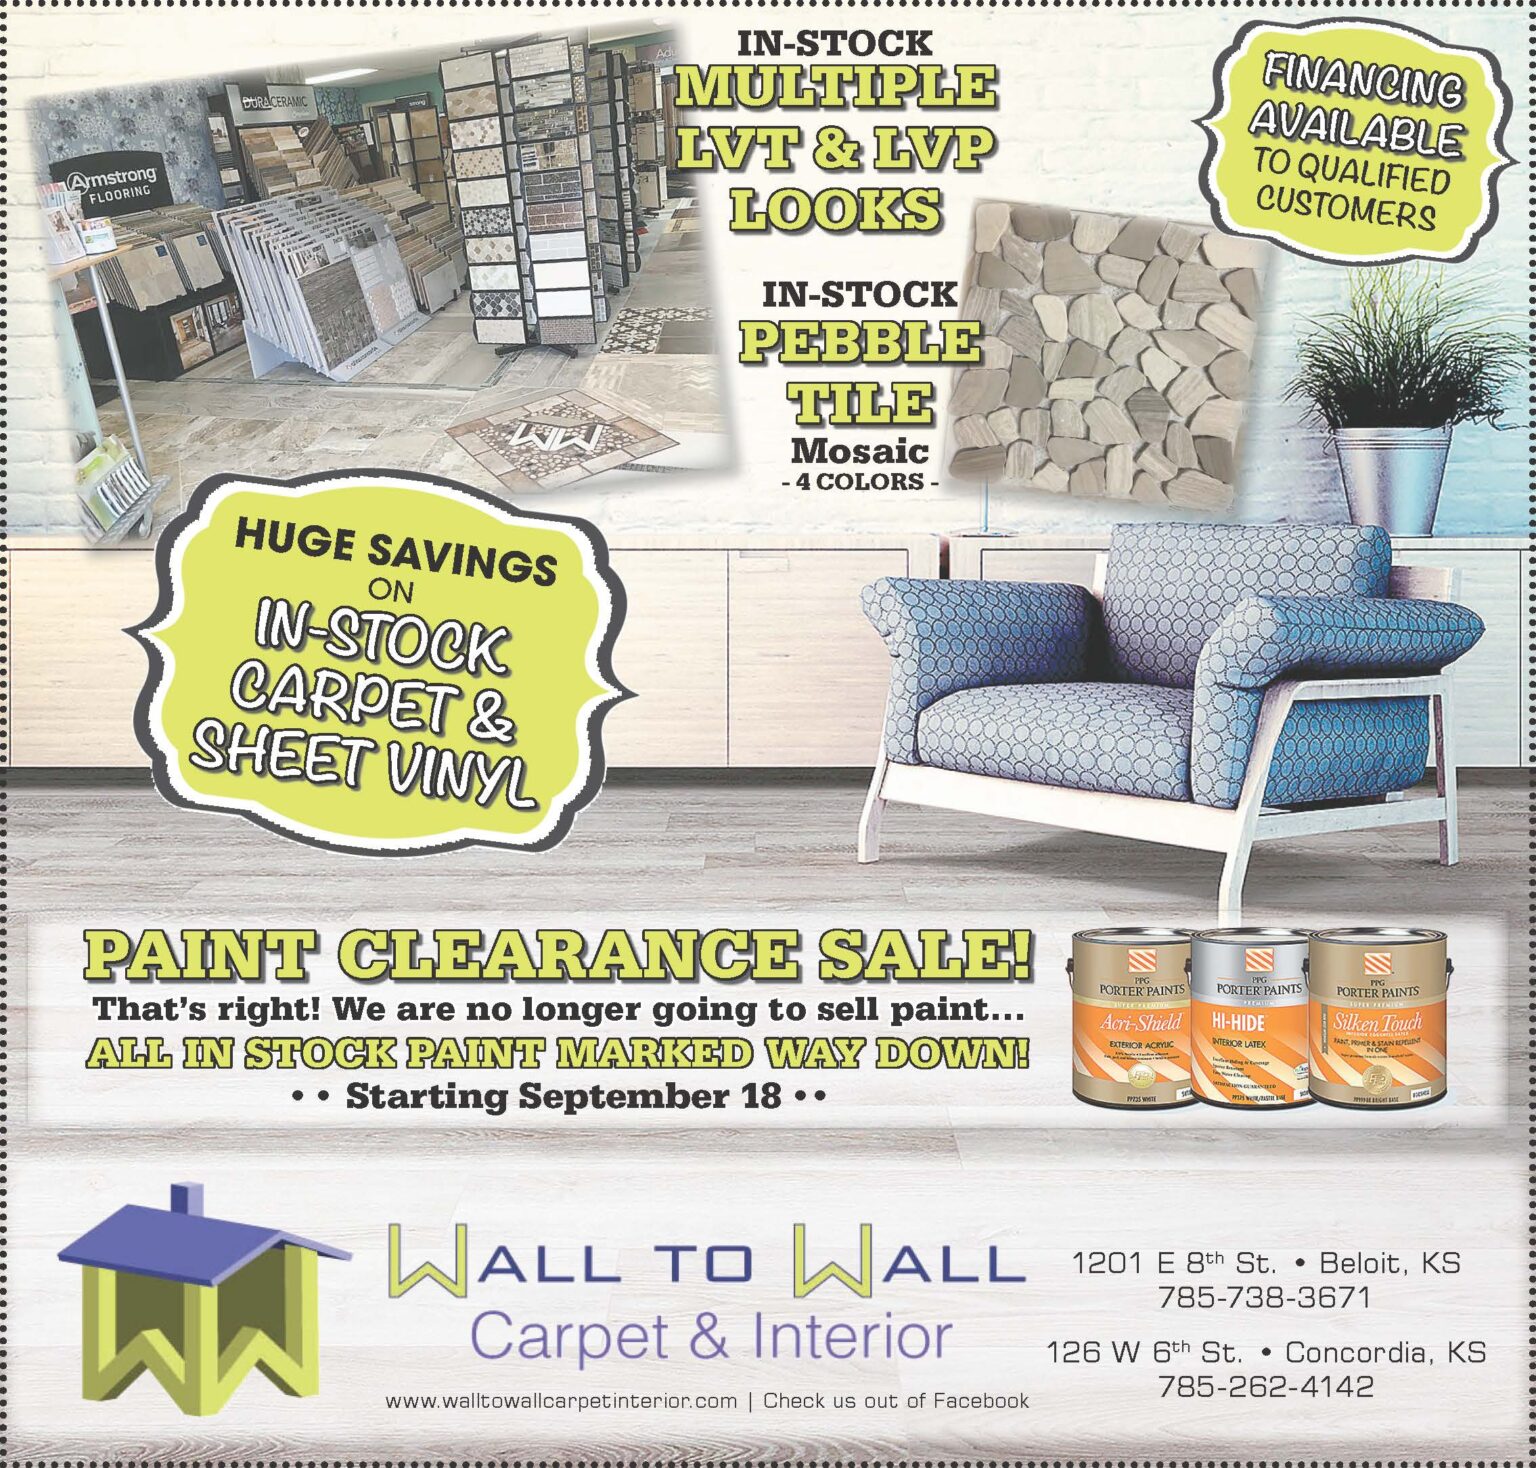 The image is a vibrant advertisement for a paint clearance sale at a shop called Wall to Wall Carpet & Interior. The colorful advert featues a blue armchair and four cans of paint. The ad prominently displays sale announcements, like "Huge savings! In-Stock Carpet & Paint Vinyl" and "Paint Clearance Sale!". Additional information reveals that the shop will no longer sell paint, thus all in-stock paint is significantly marked down. It includes two contact numbers for the store's branches in Beloit and Concordia and also provides the website address for further information. The presence of various brand names such as Armstrong Flooring, also suggests the diverse product range available at the store.